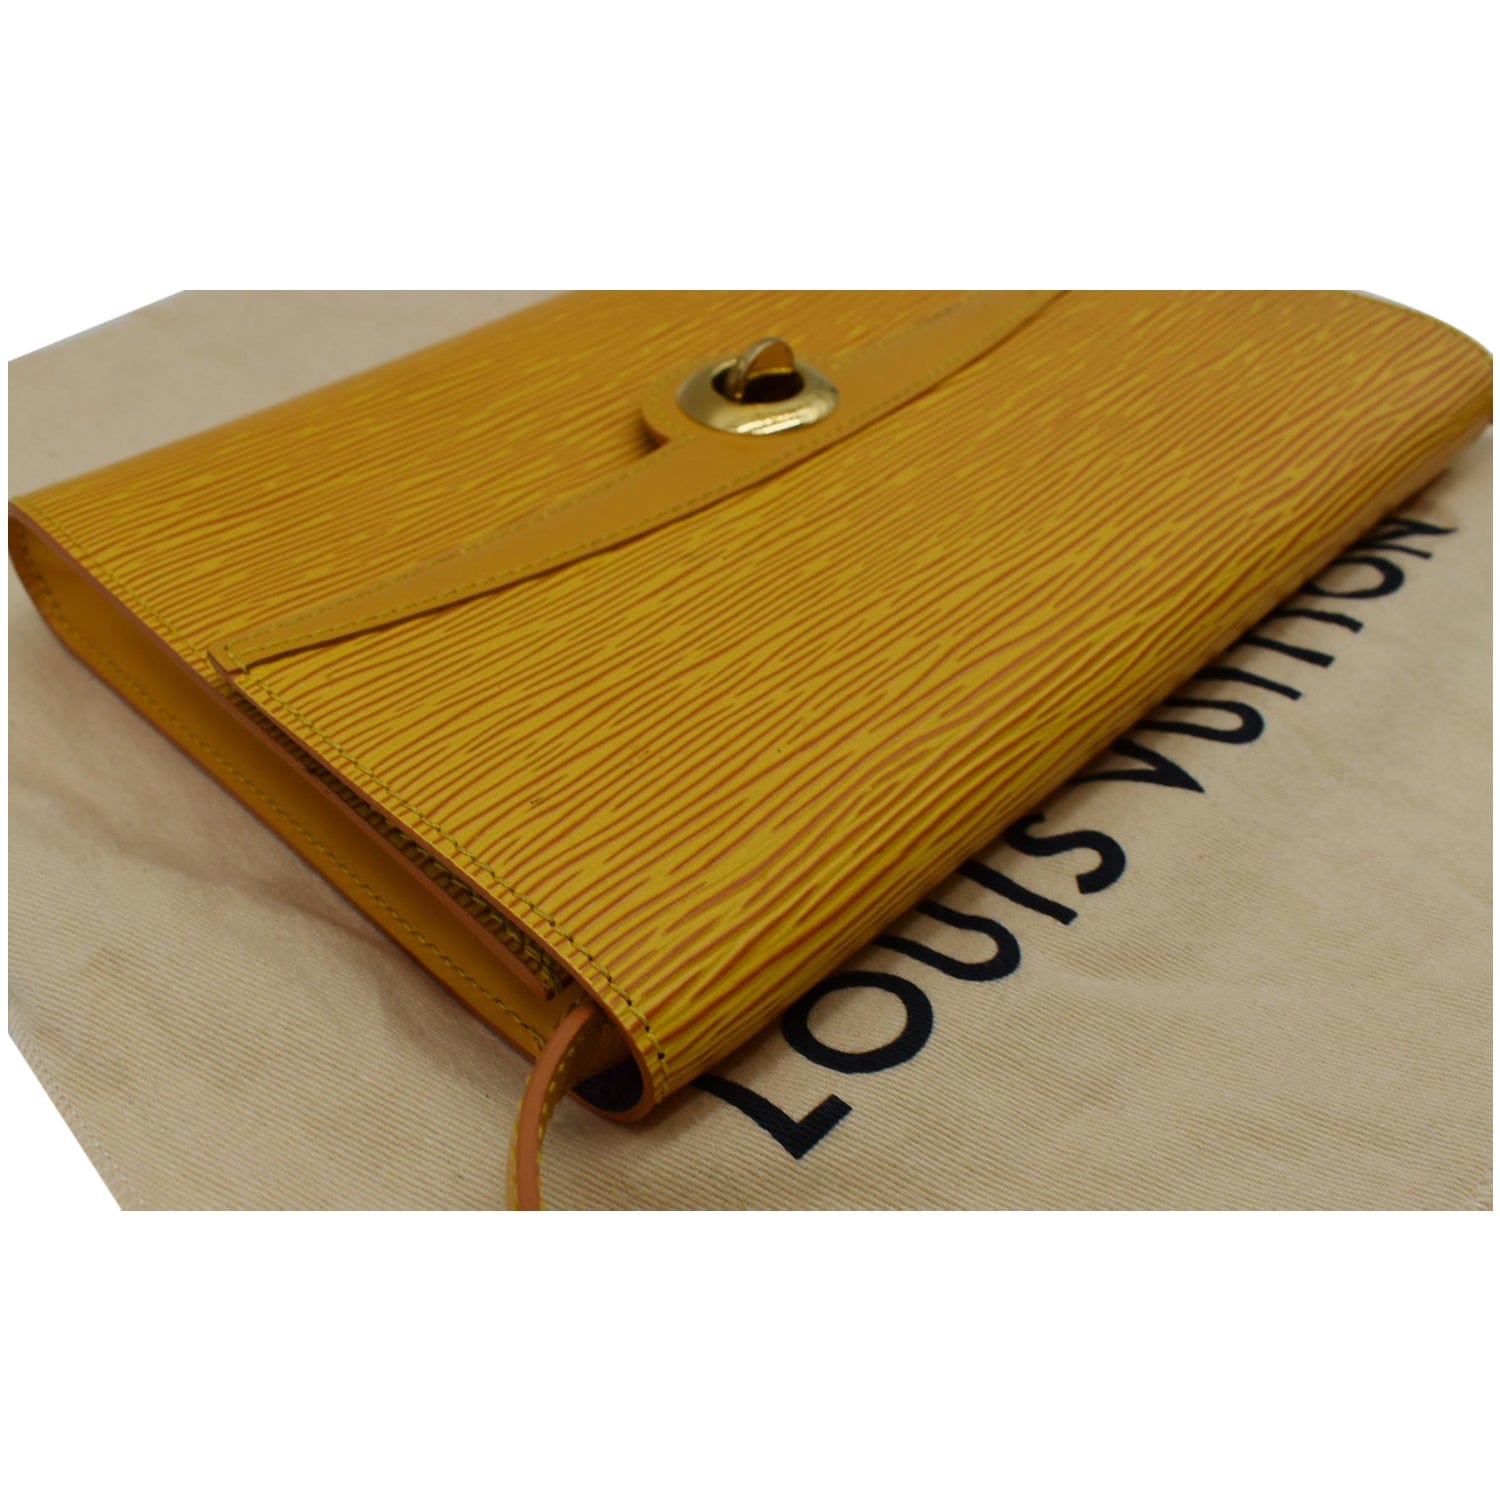 Louis Vuitton Epi Leather French Purse - Yellow Wallets, Accessories -  LOU774190